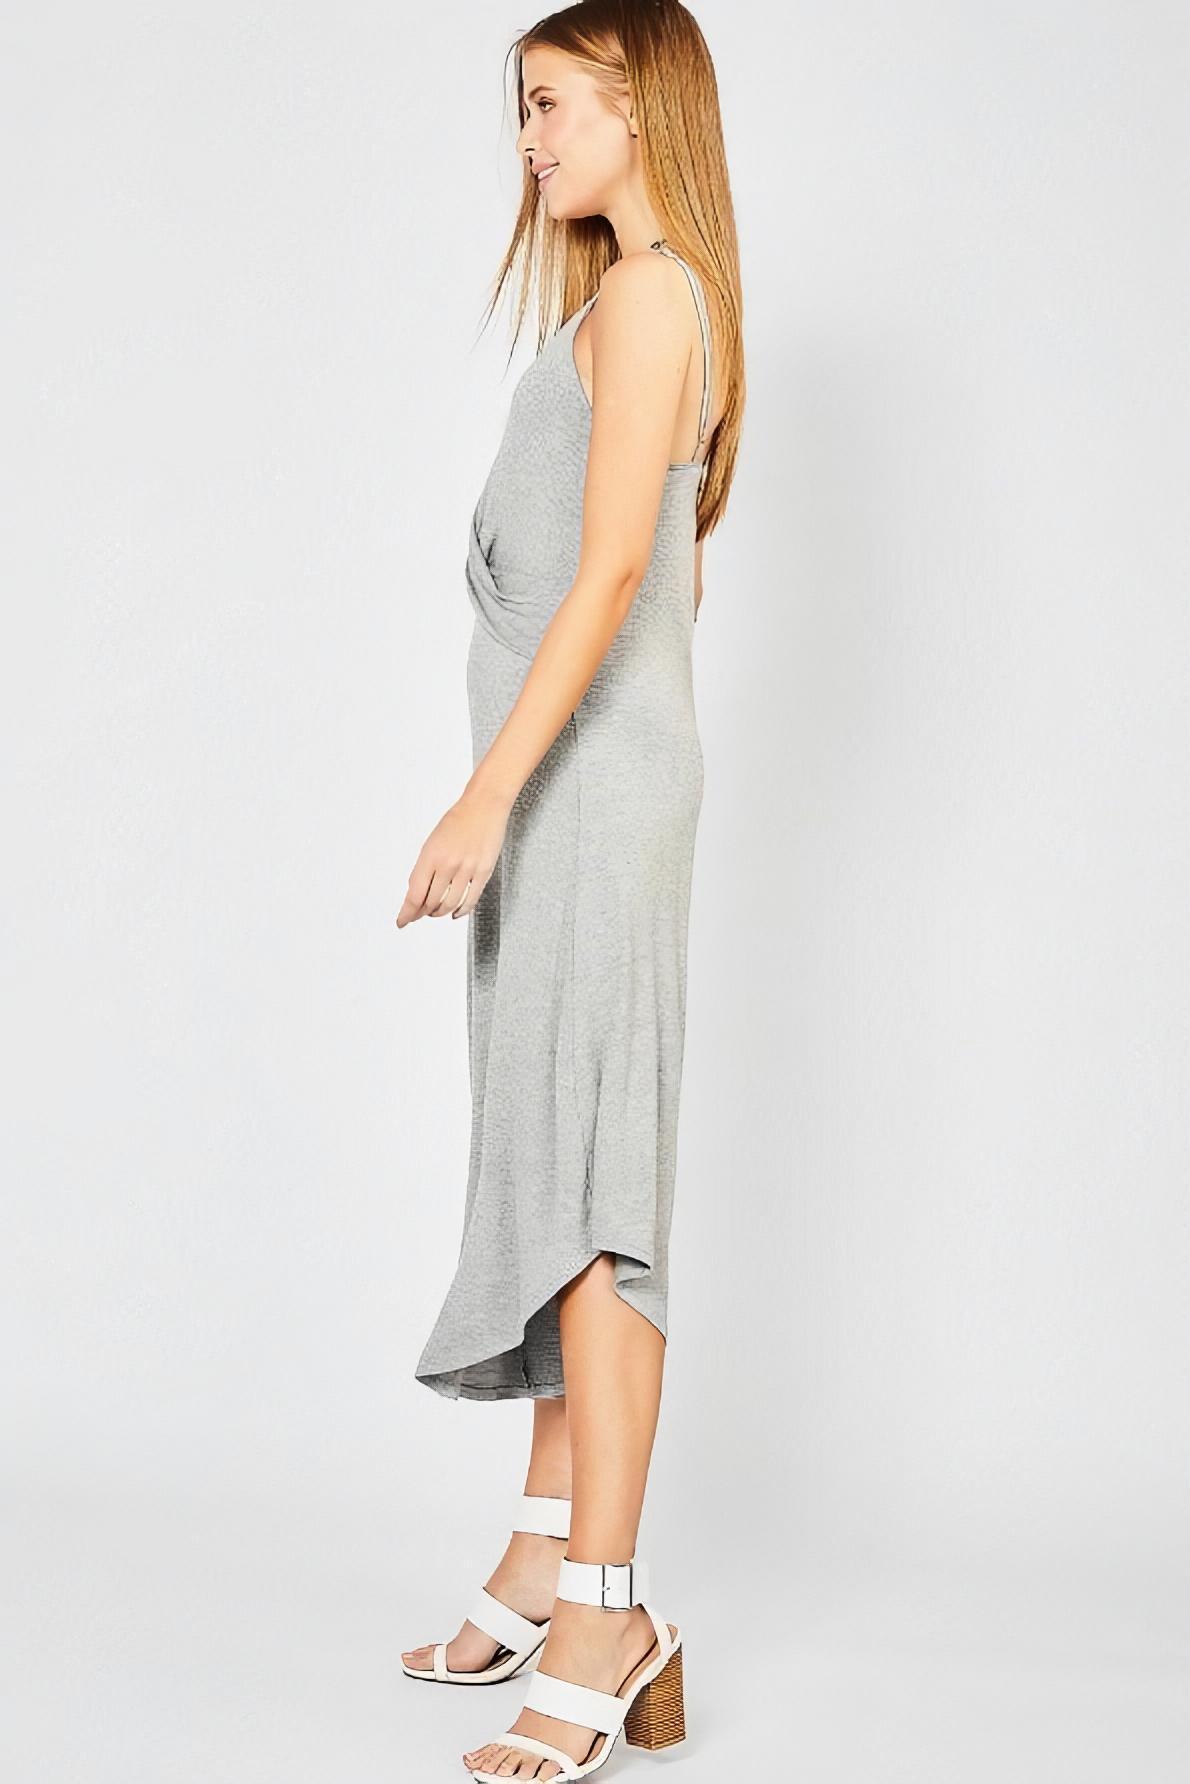 Grey Cropped Jumpsuit by Entro